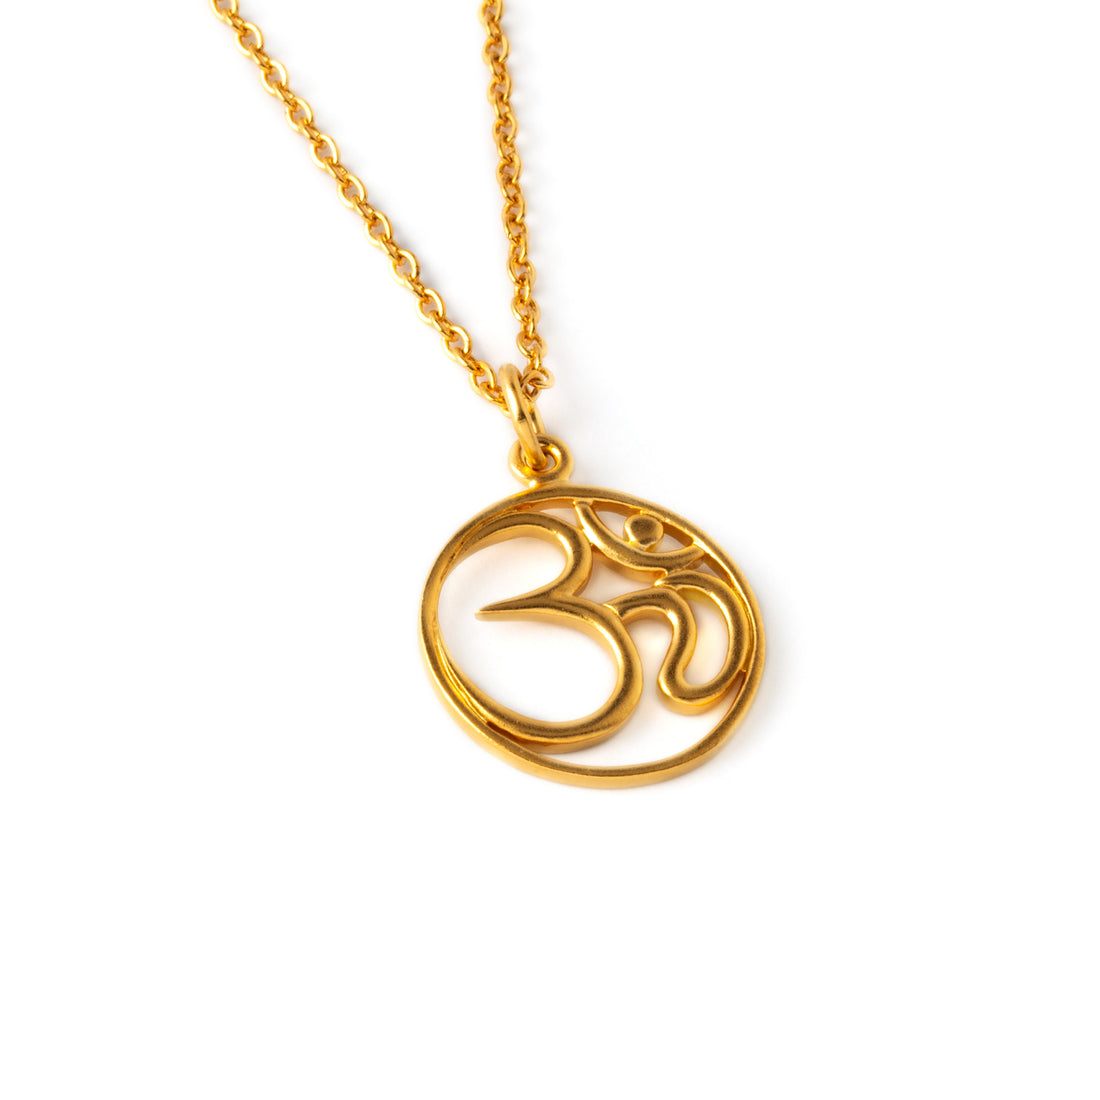 Gold Om stamp necklace on a chain right side view